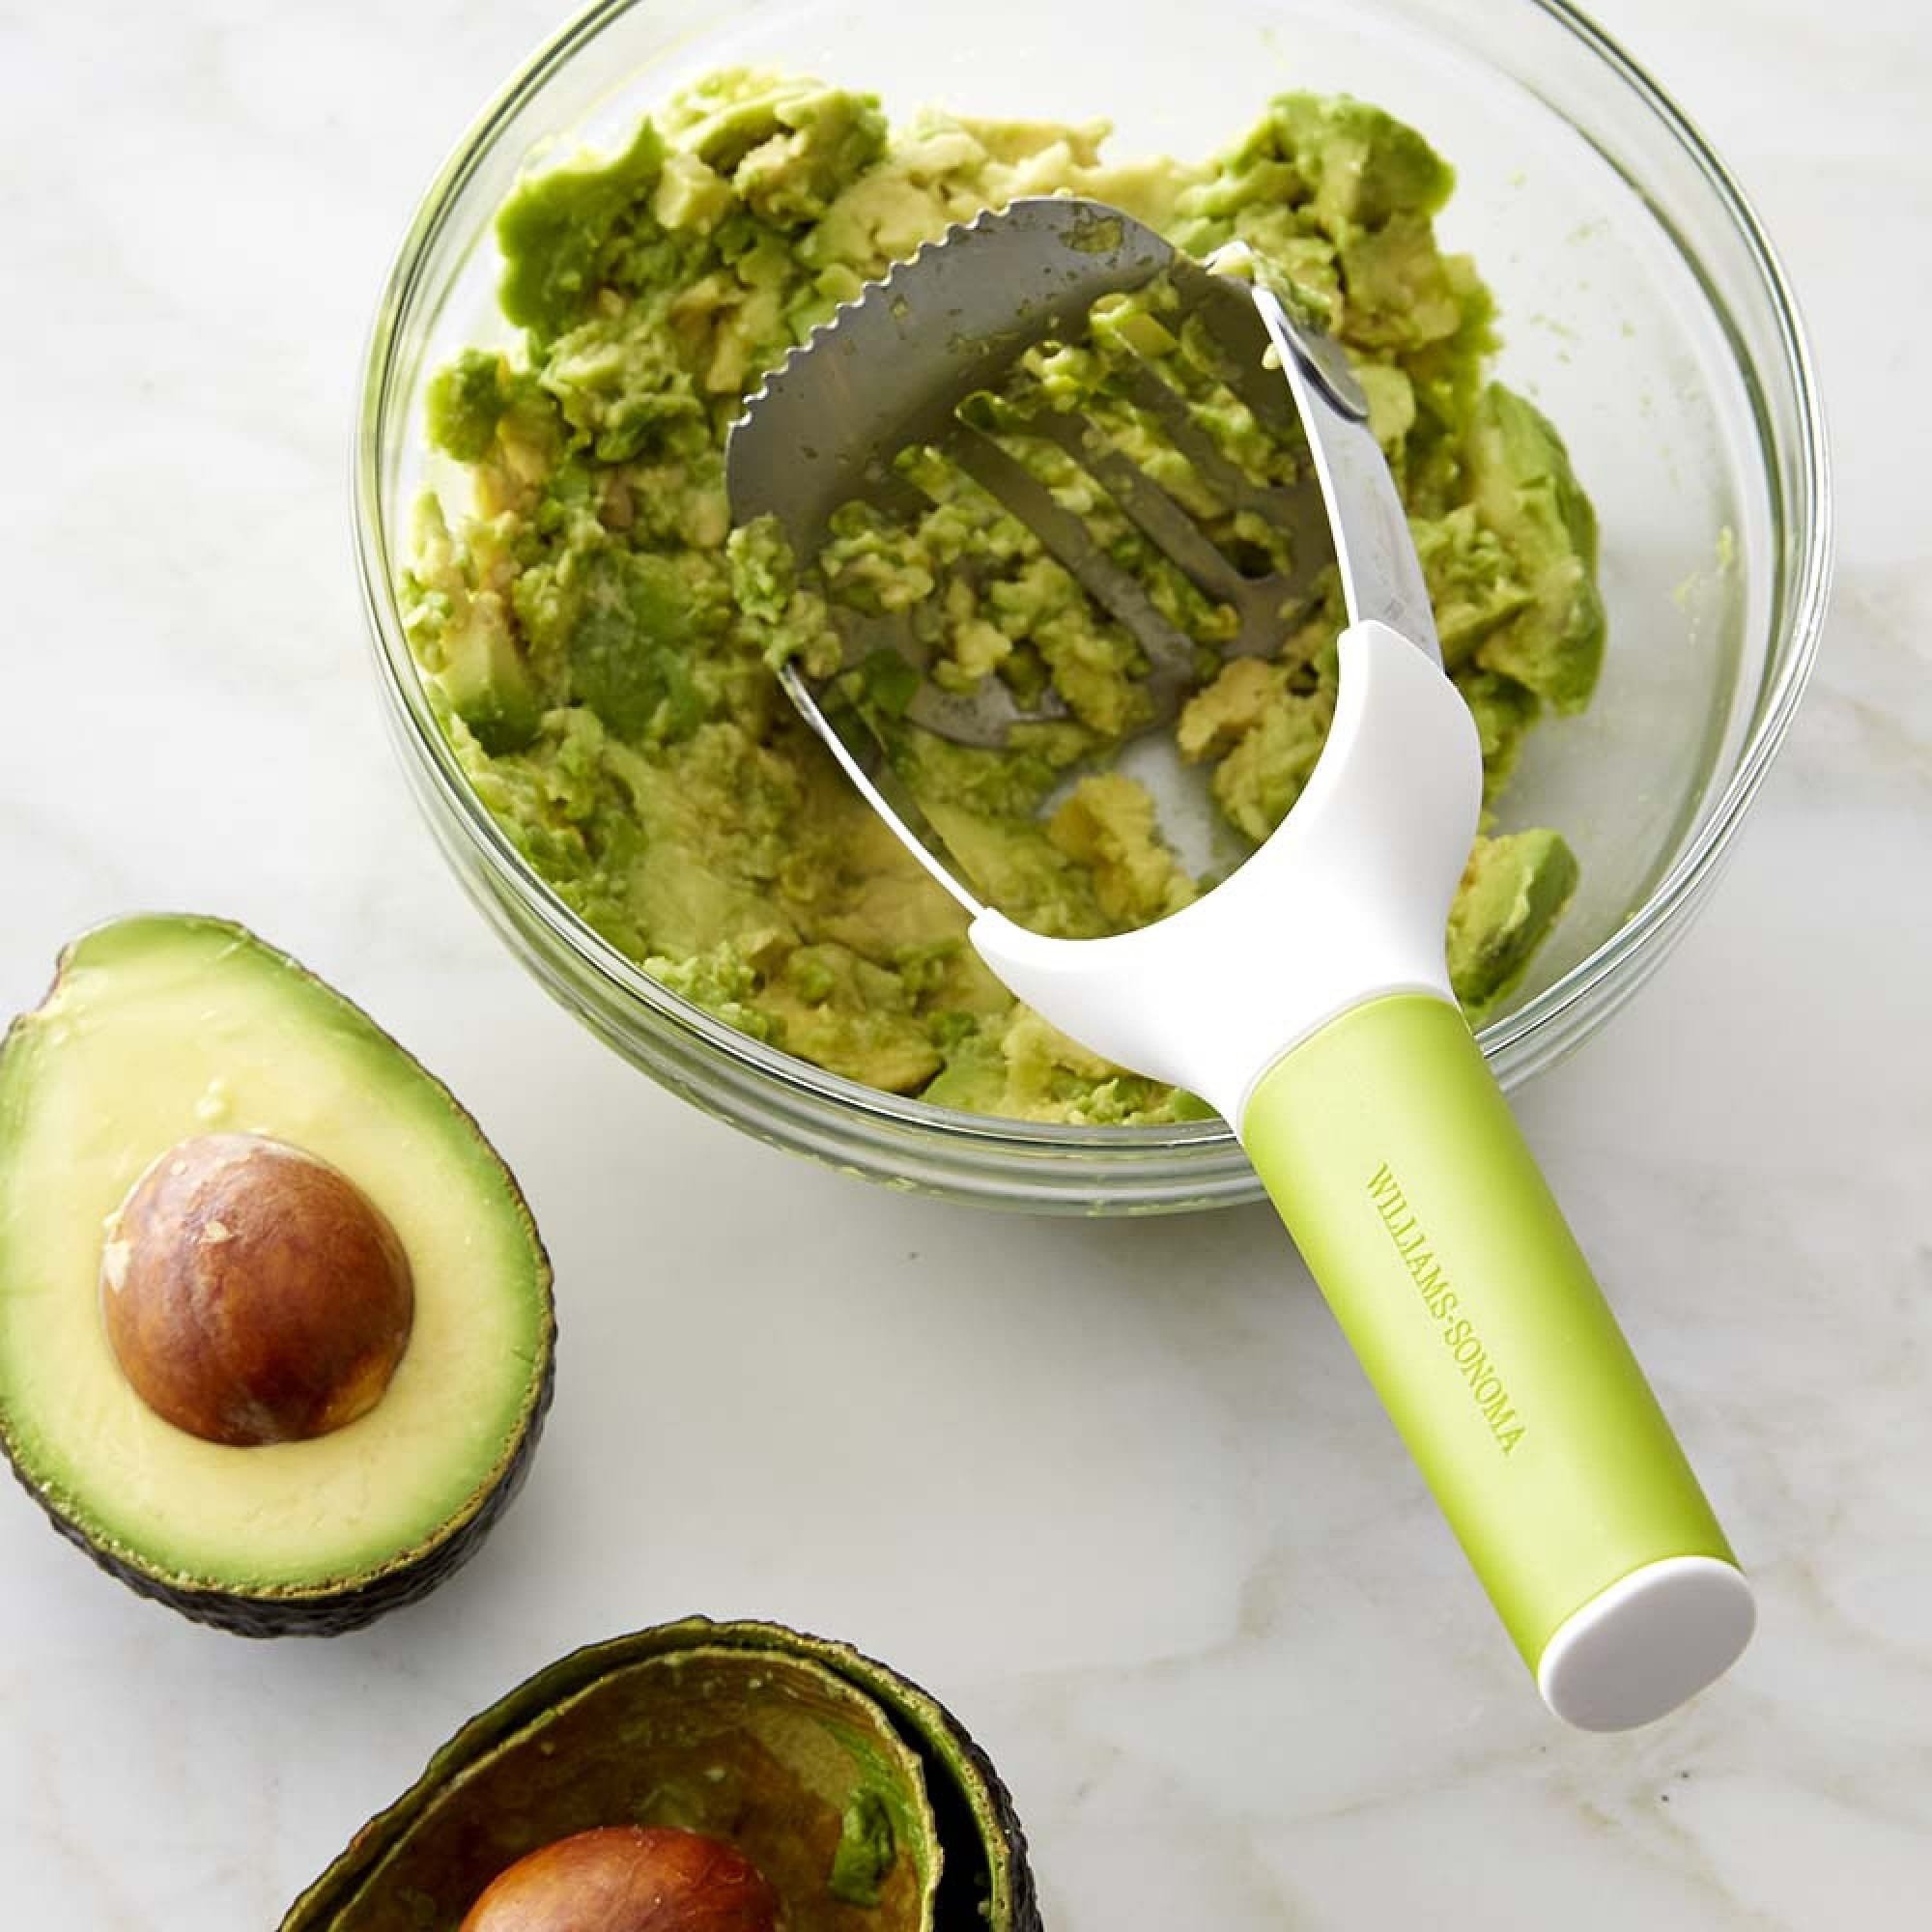 wedding registry ideas Avocado pitter and masher from Williams Sonoma